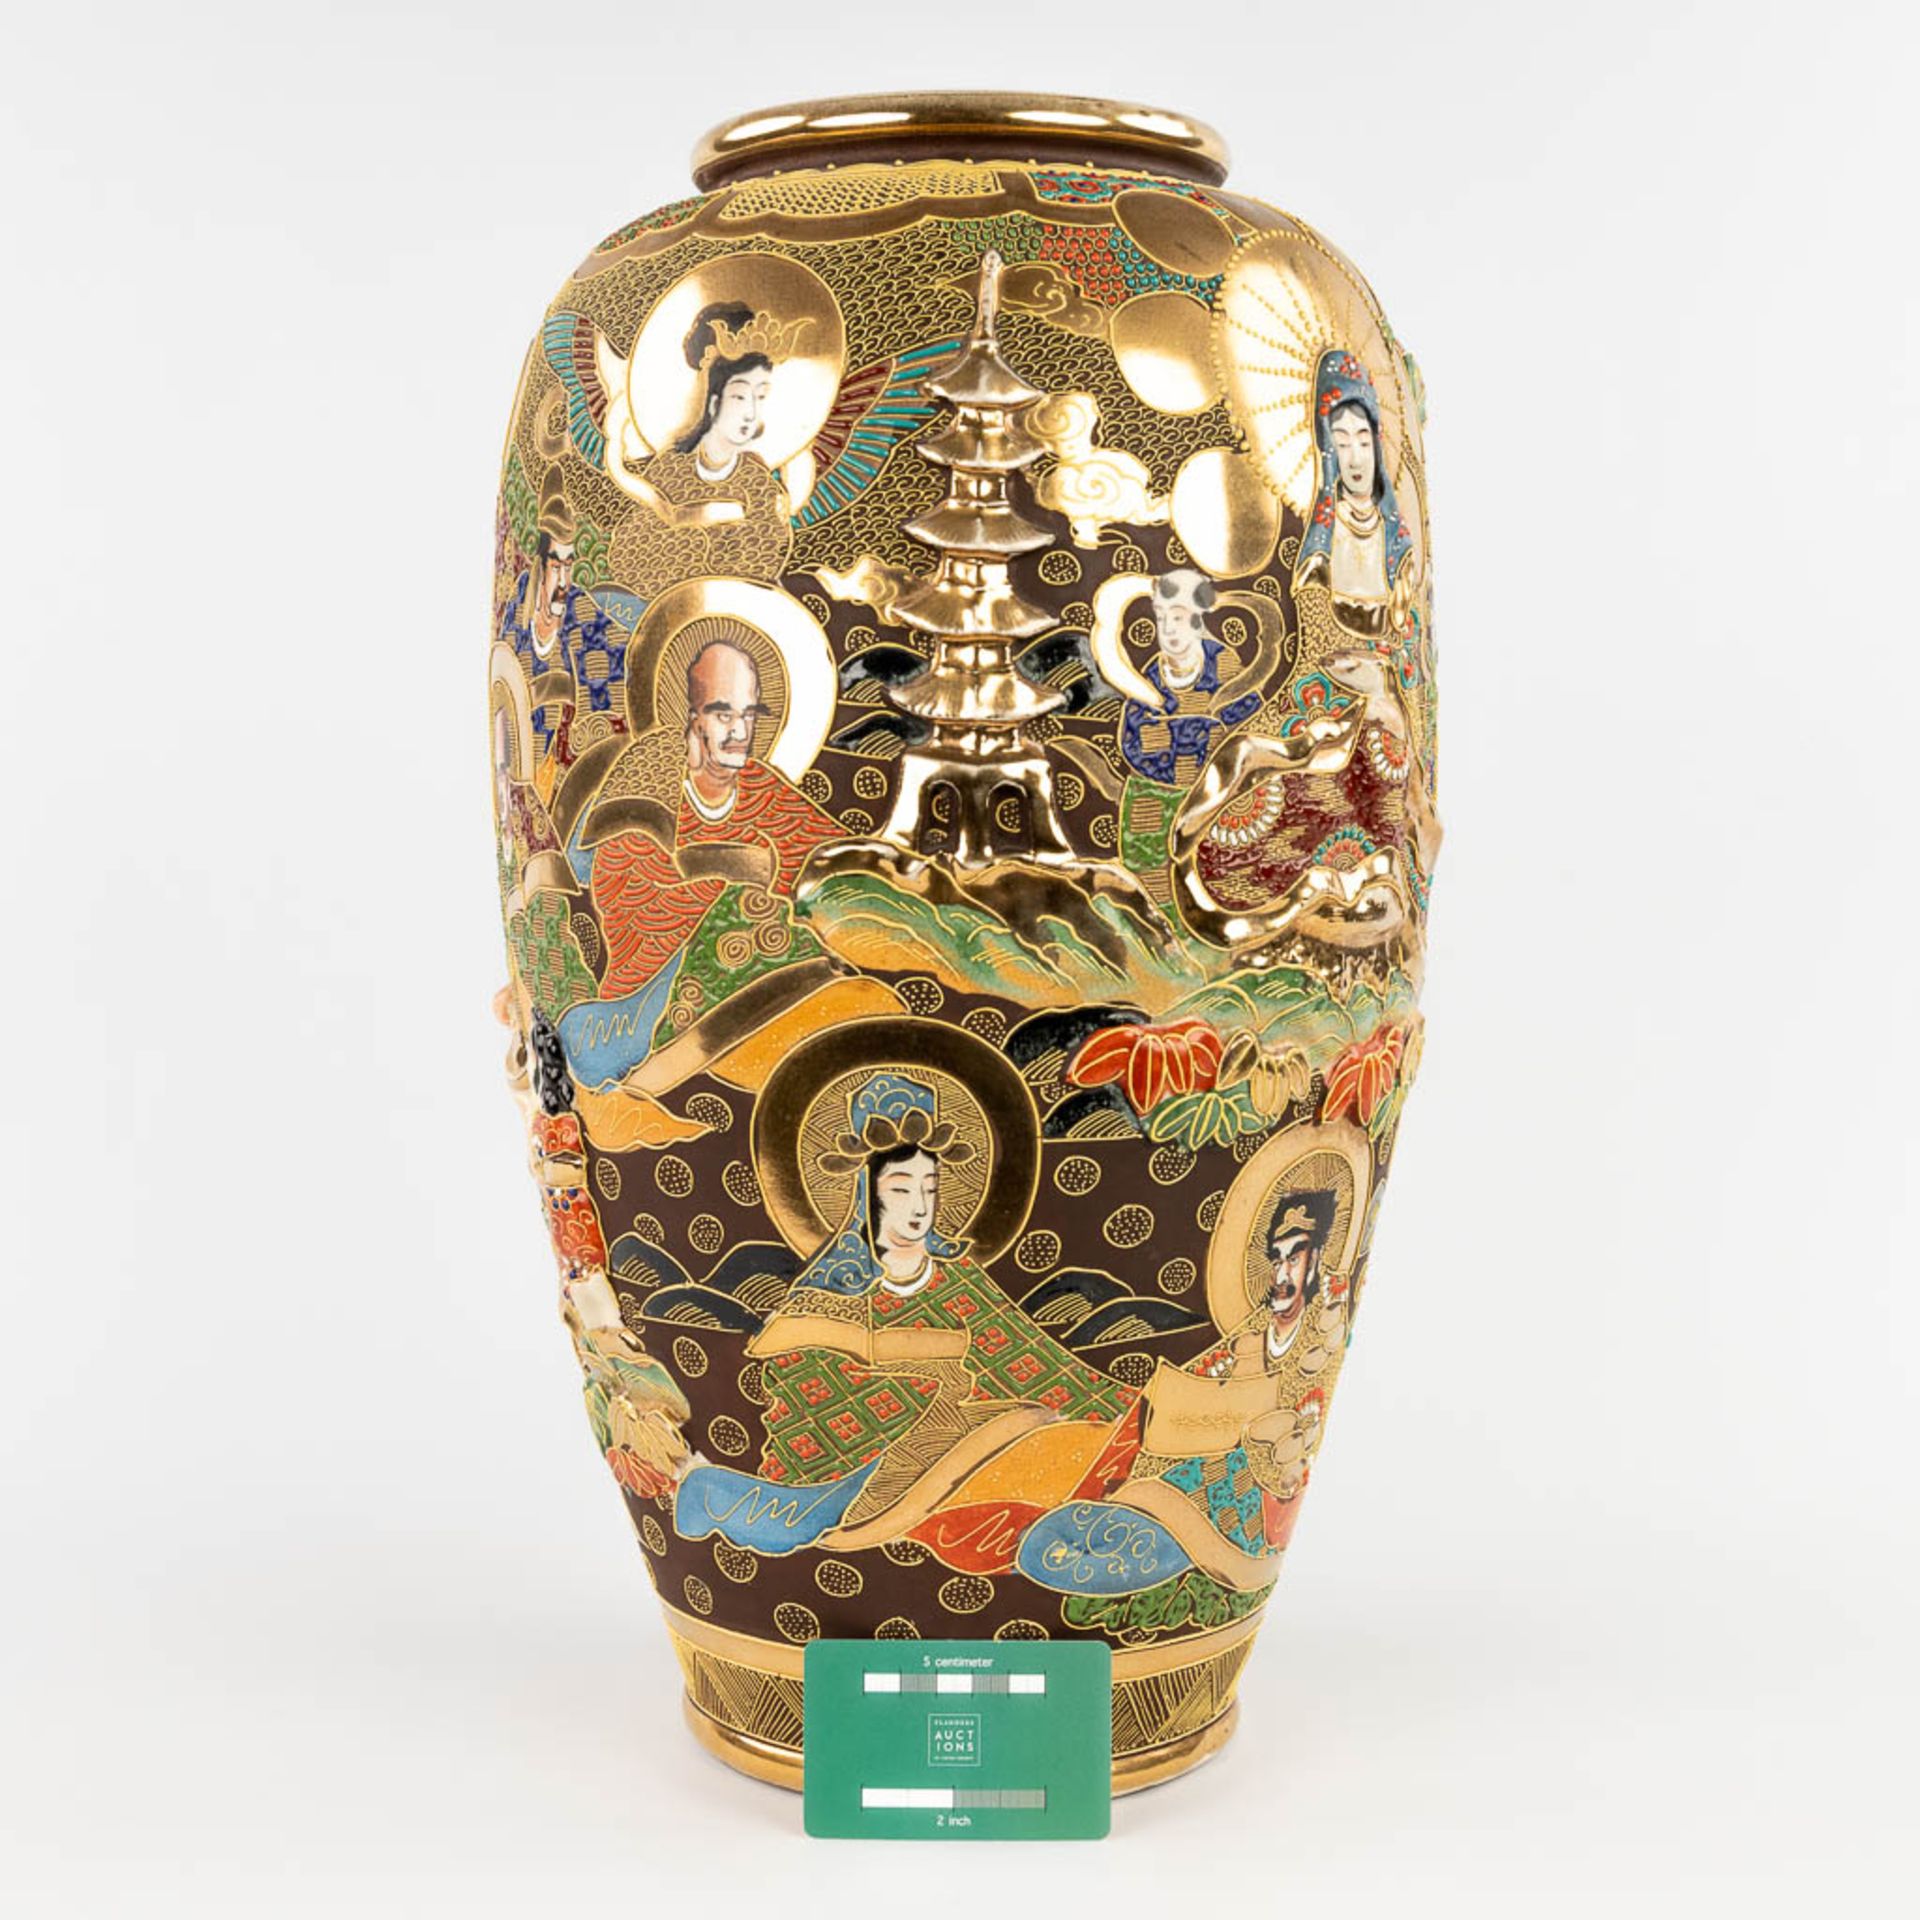 A large vase, Satsuma faience decorated with men and ladies, Japan. 20th C. (H:48 x D:28 cm) - Image 2 of 17